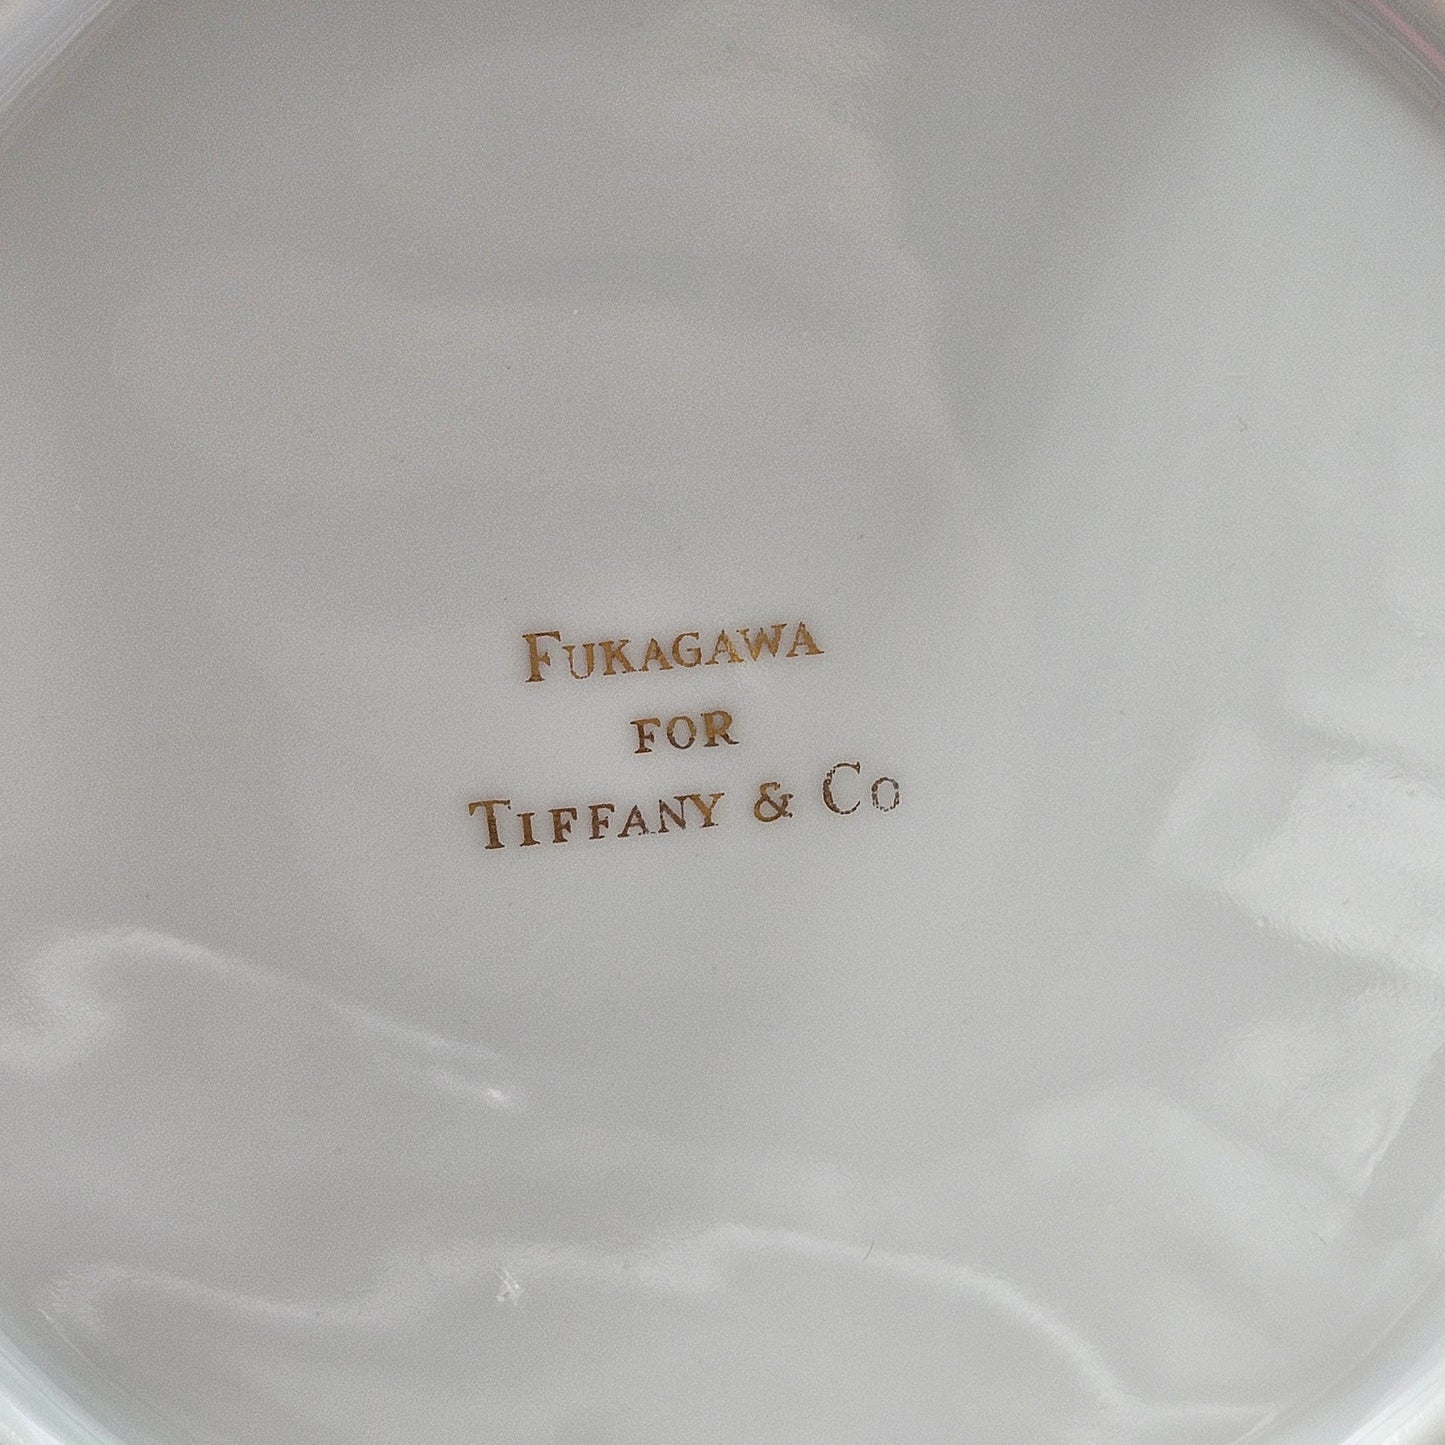 Vintage Tiffany & Co. Fukagawa Red Dragon Soup Bread & Butter Plate ~ 10 Available